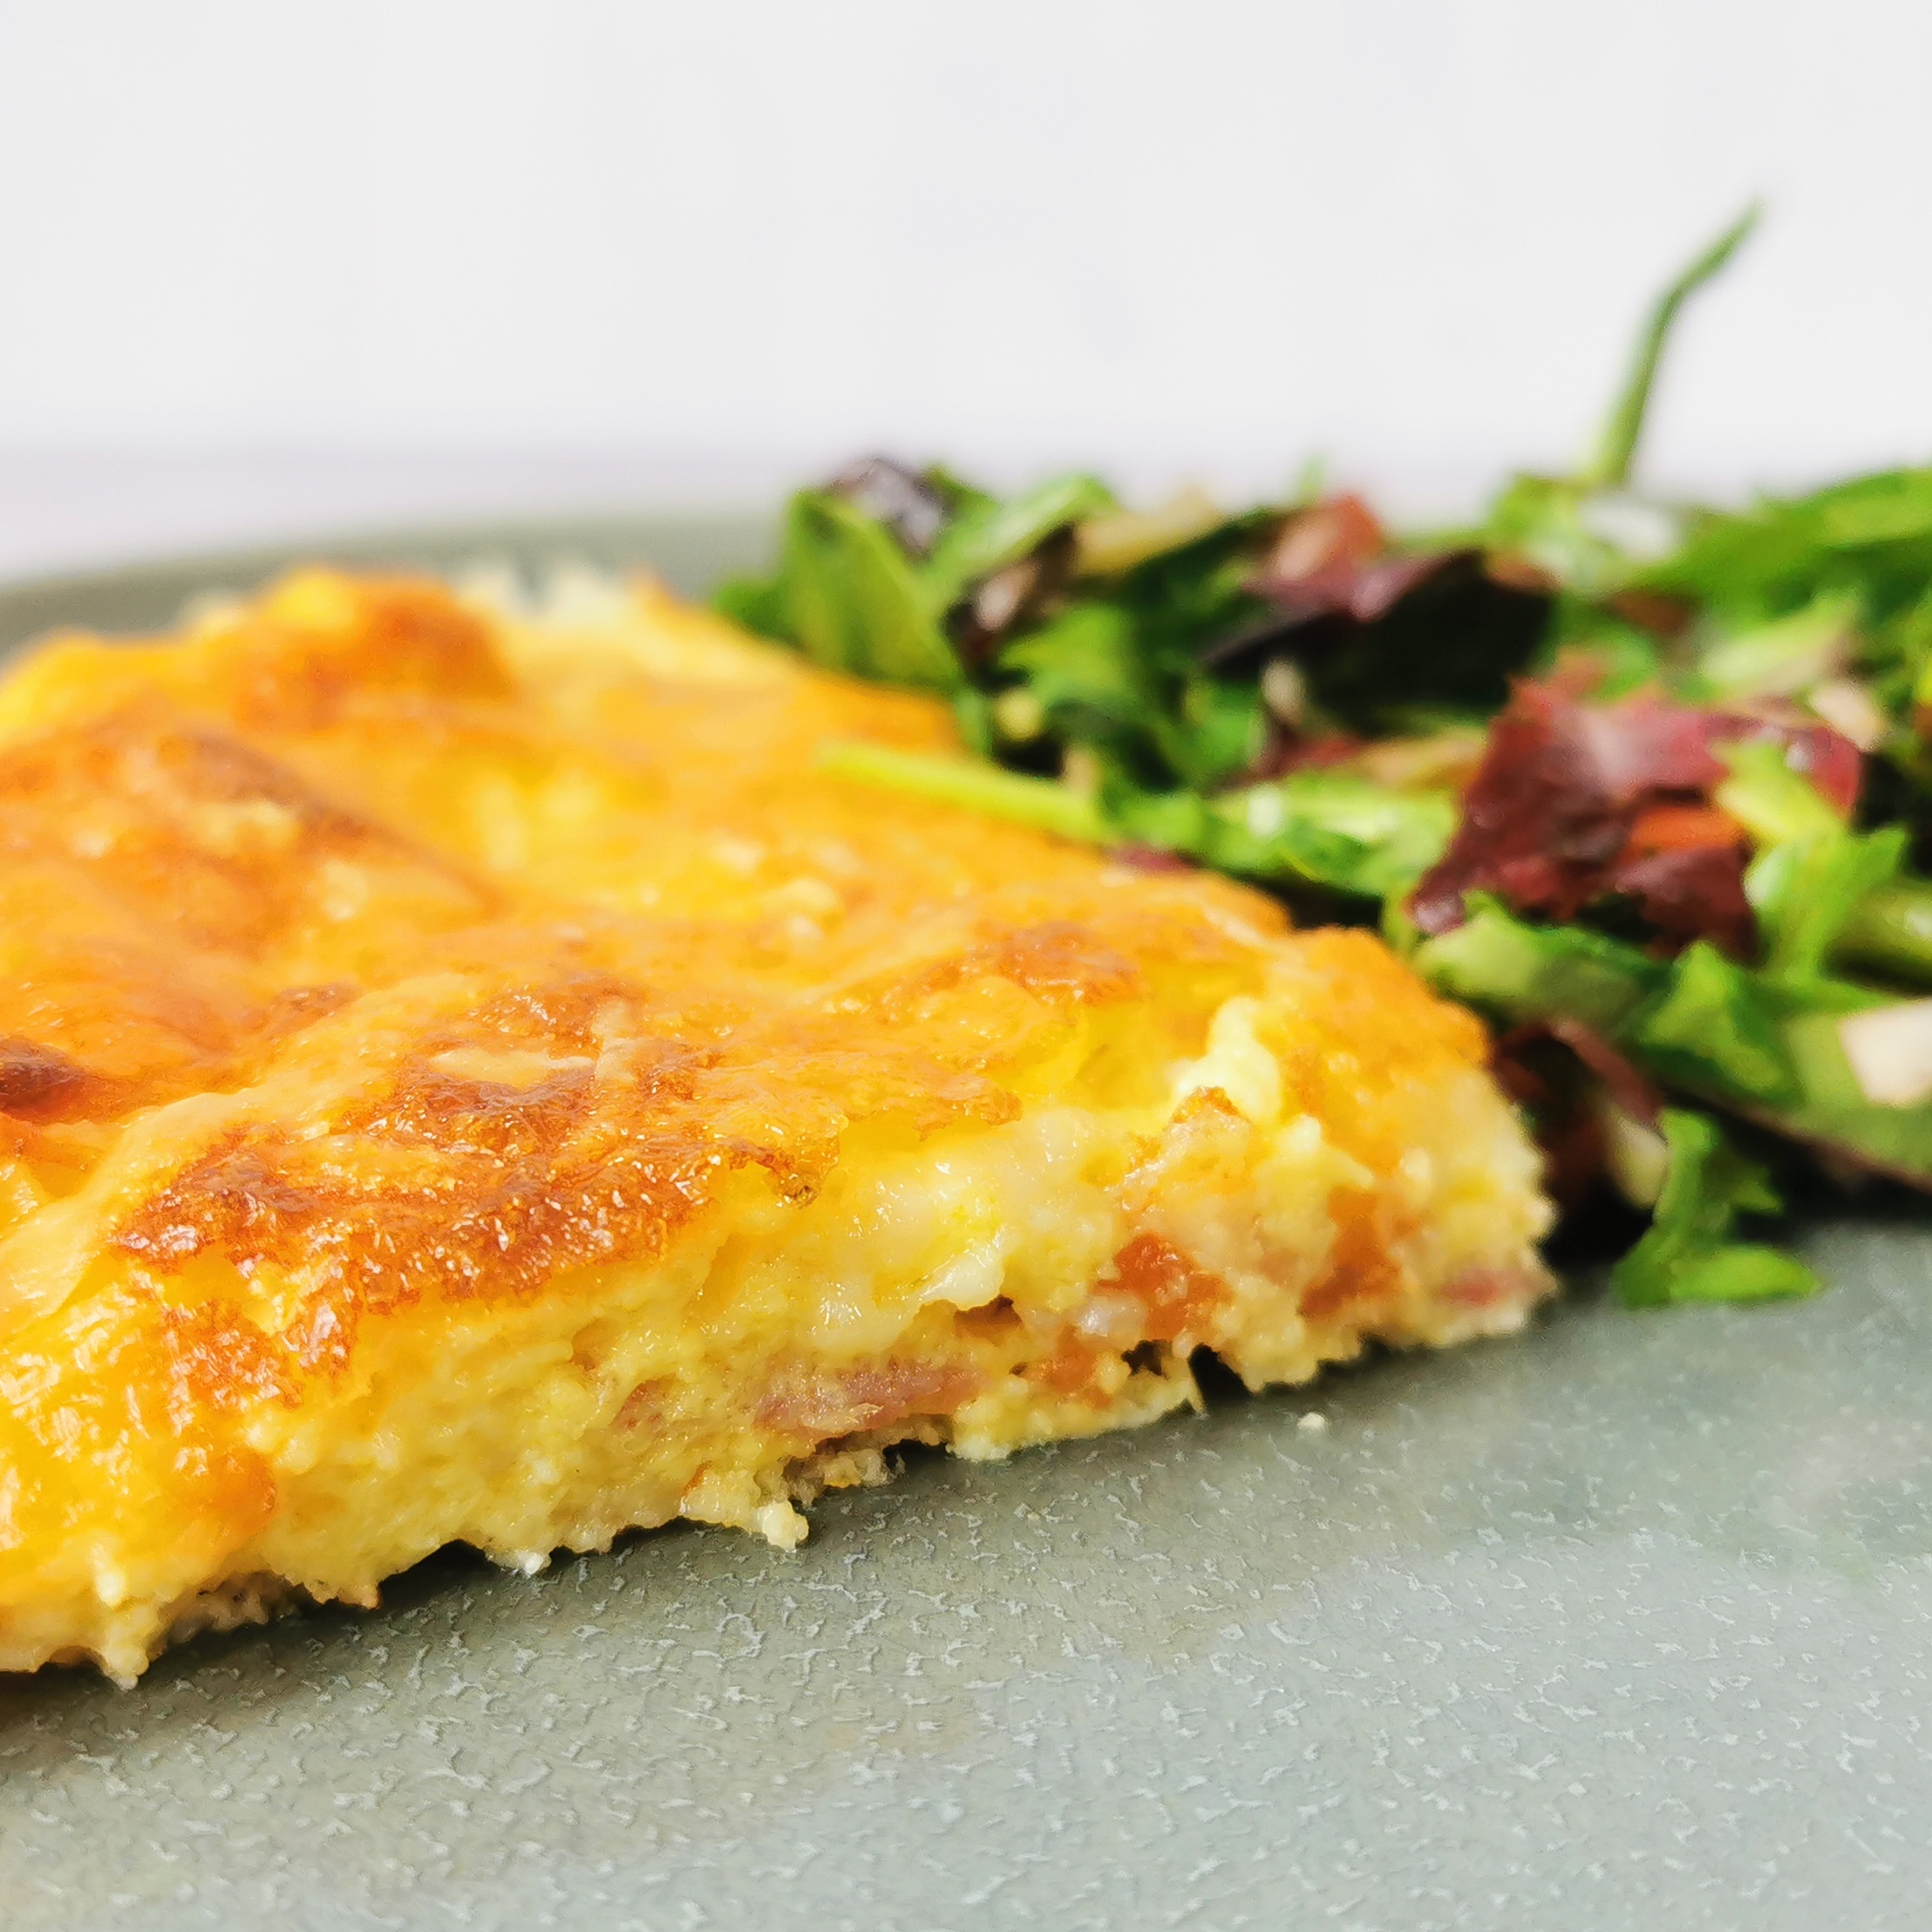 a triangle of quiche lorraine with a colourful sald on a grey plate